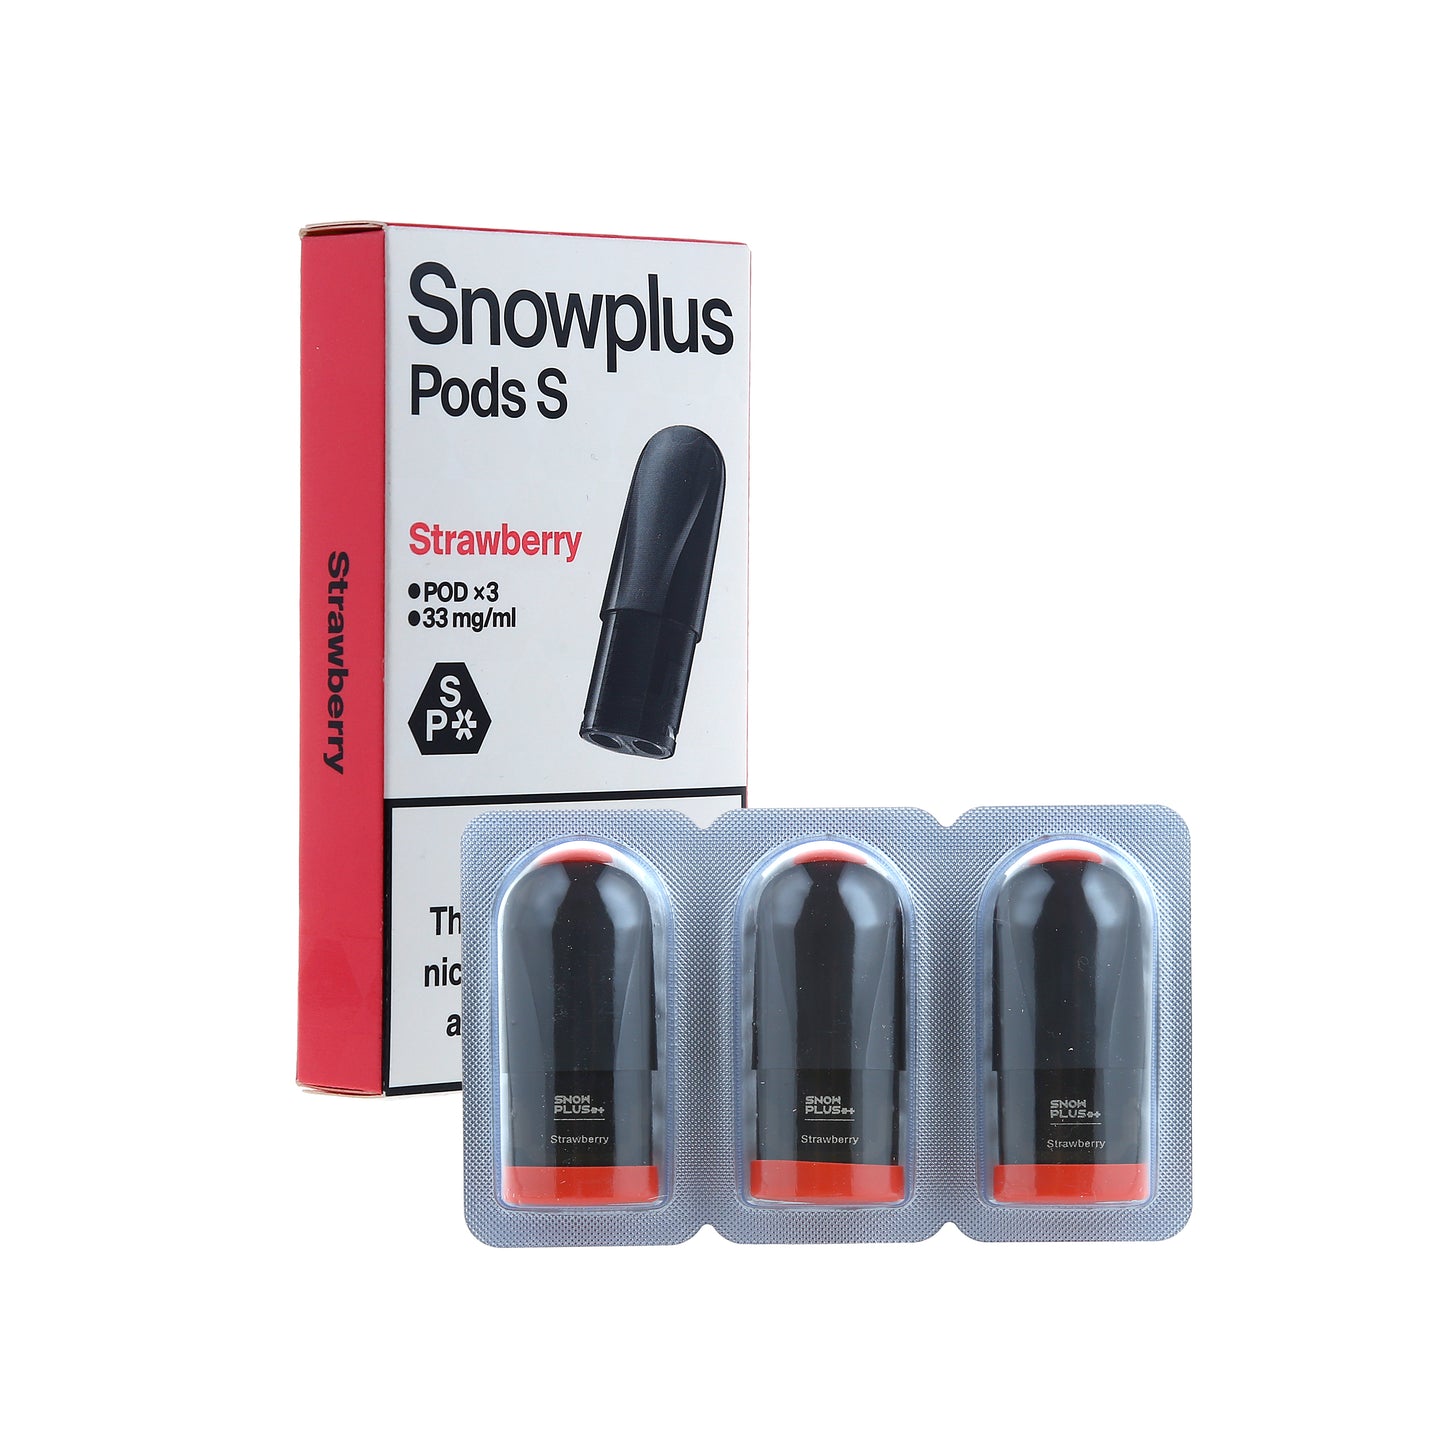 Snowplus Pods Box of 10 - Multiple Flavors Pack of 3